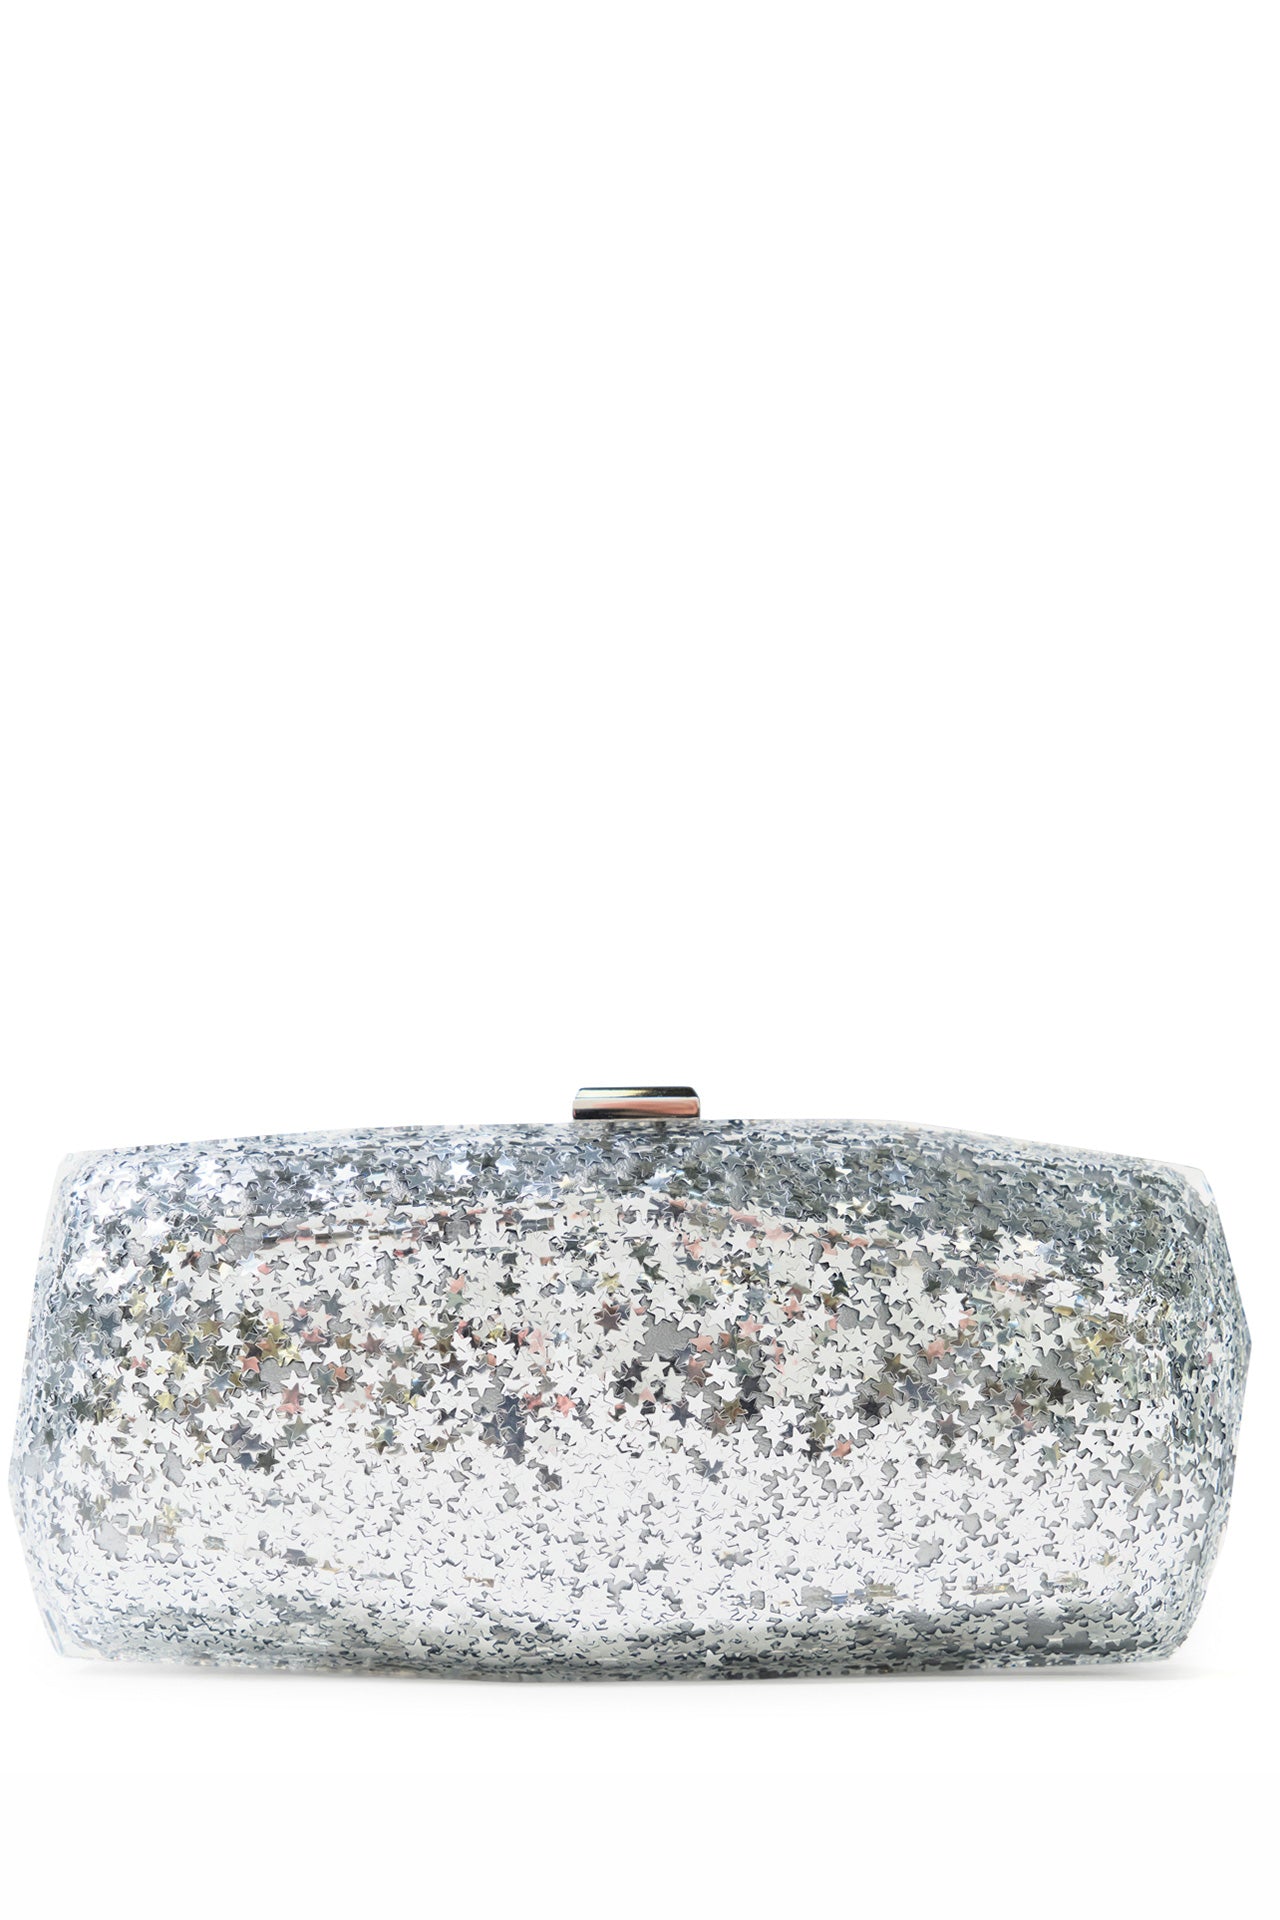 Monique Lhuillier lucite faceted minaudière handbag in Silver Star Glitter with detachable chain - front with chain.